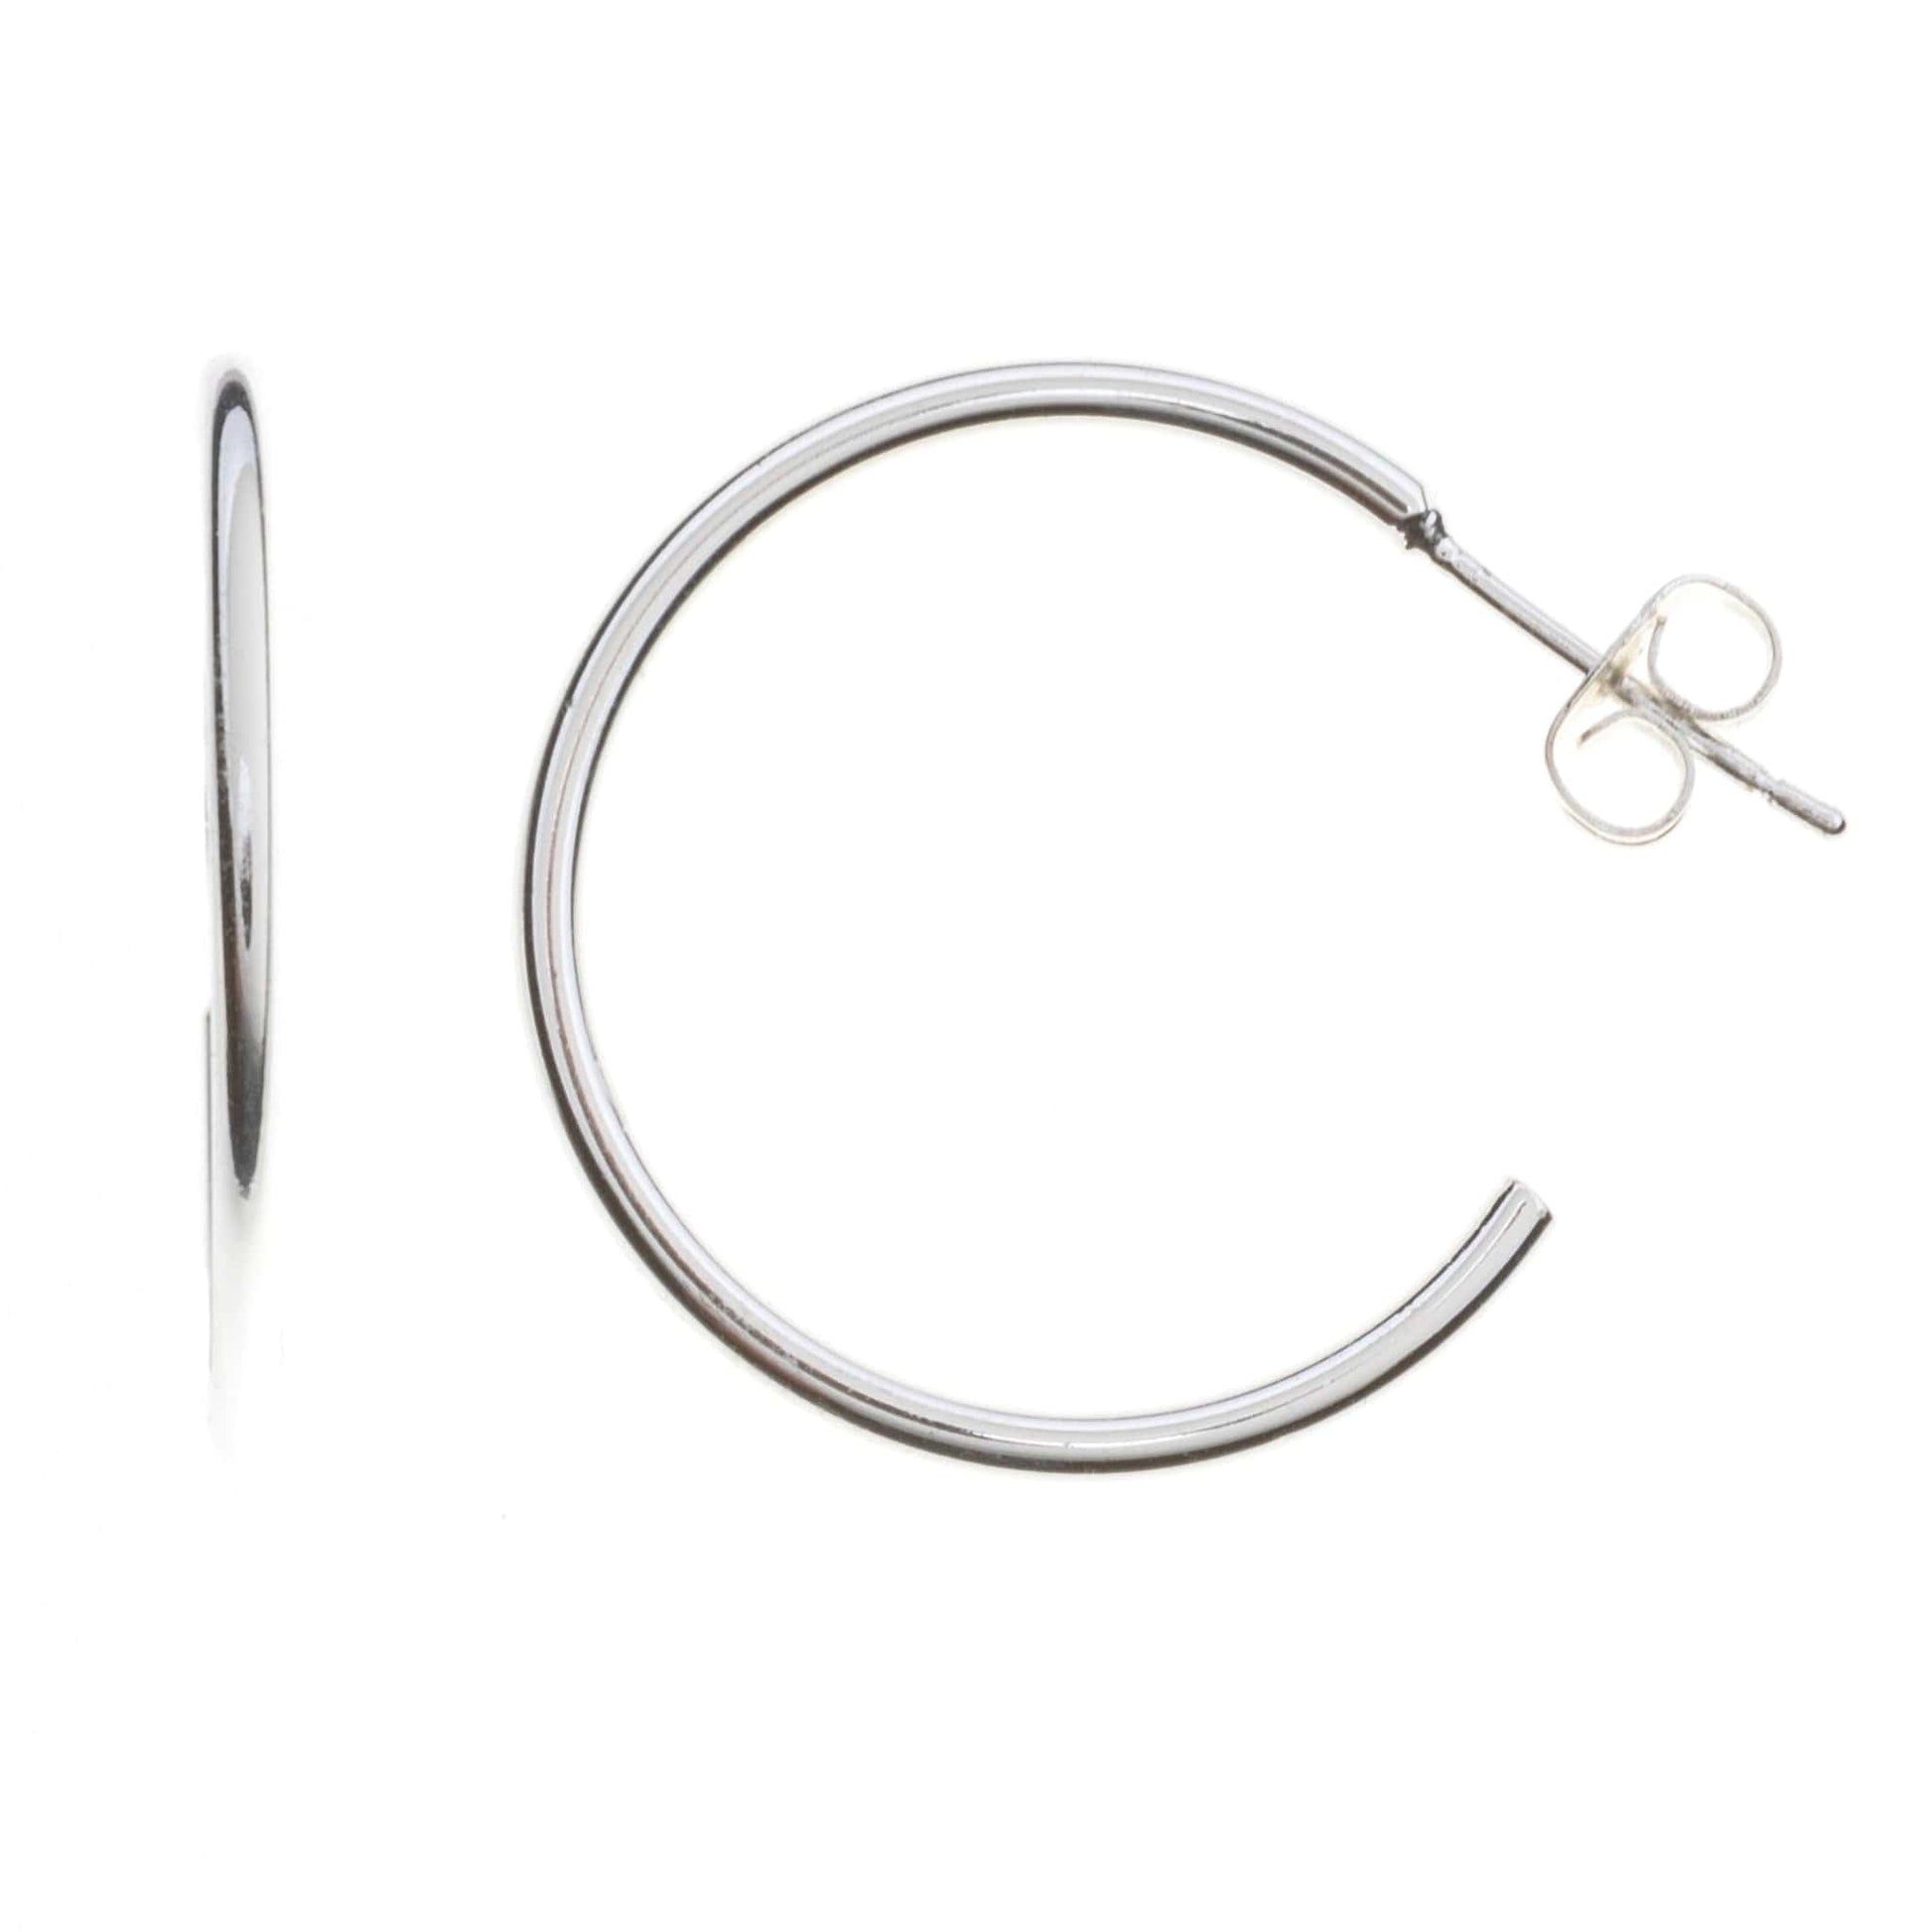 Classic silver plain hoops in extra small